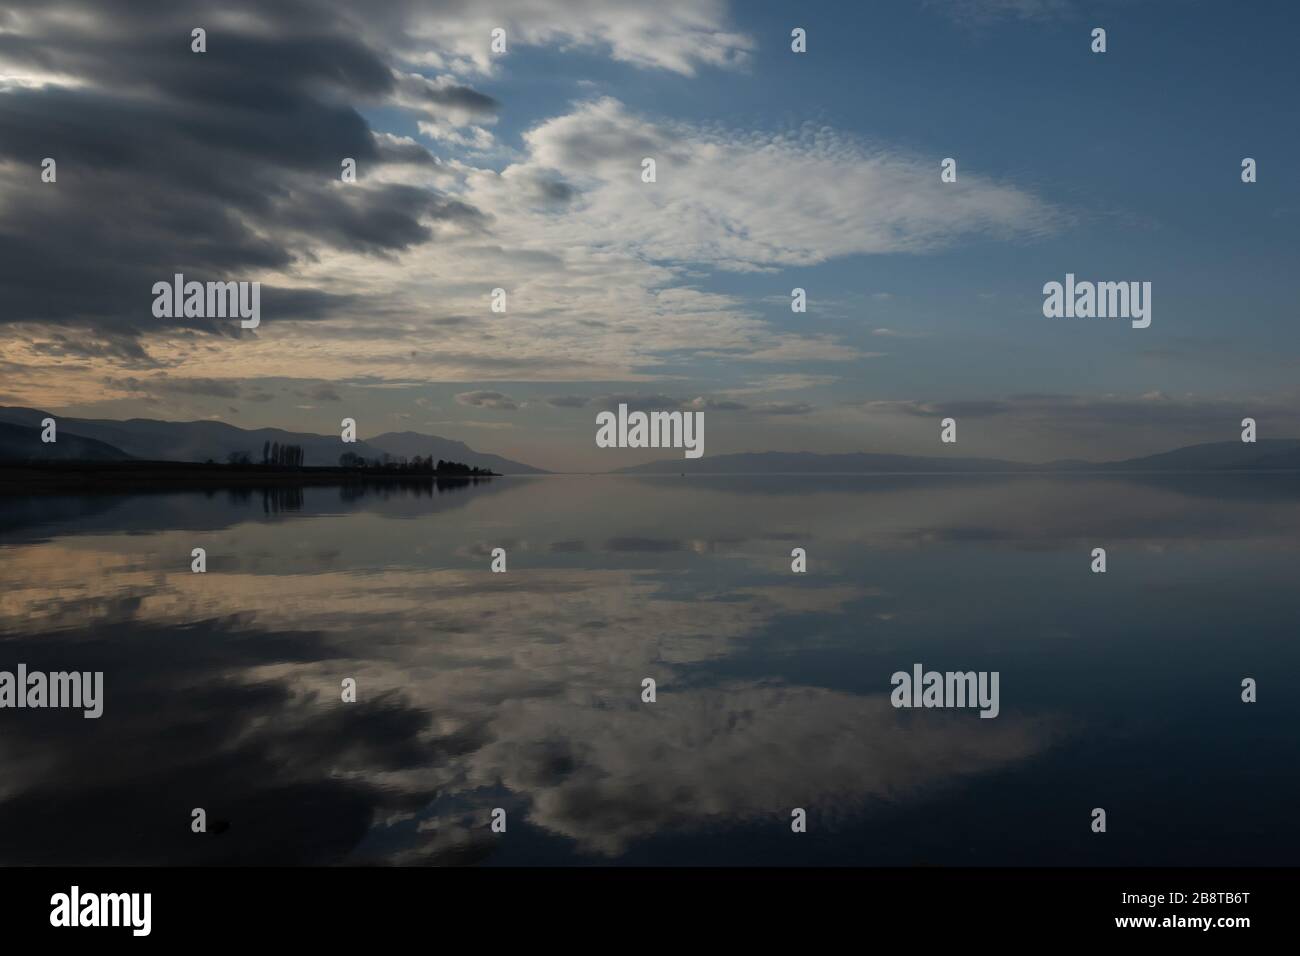 reflections in the still water of Lake Iznik at the end of day Stock Photo